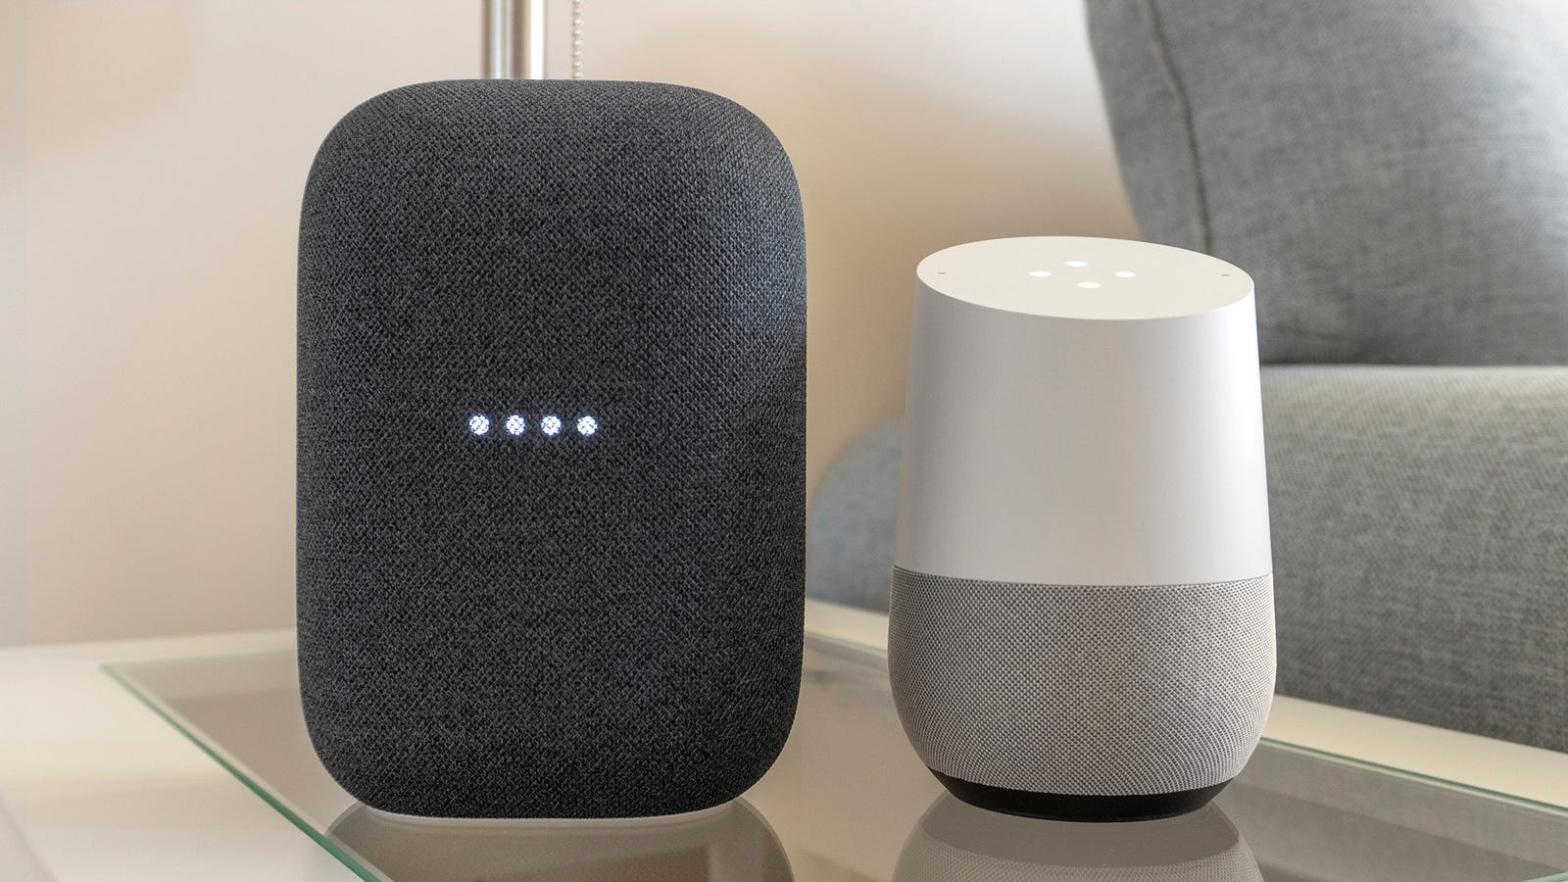 Google's smart speakers, plus some of its other devices, have been found to infringe on existing Sonos patents. (Photo: Gizmodo / Andrew Liszewski)